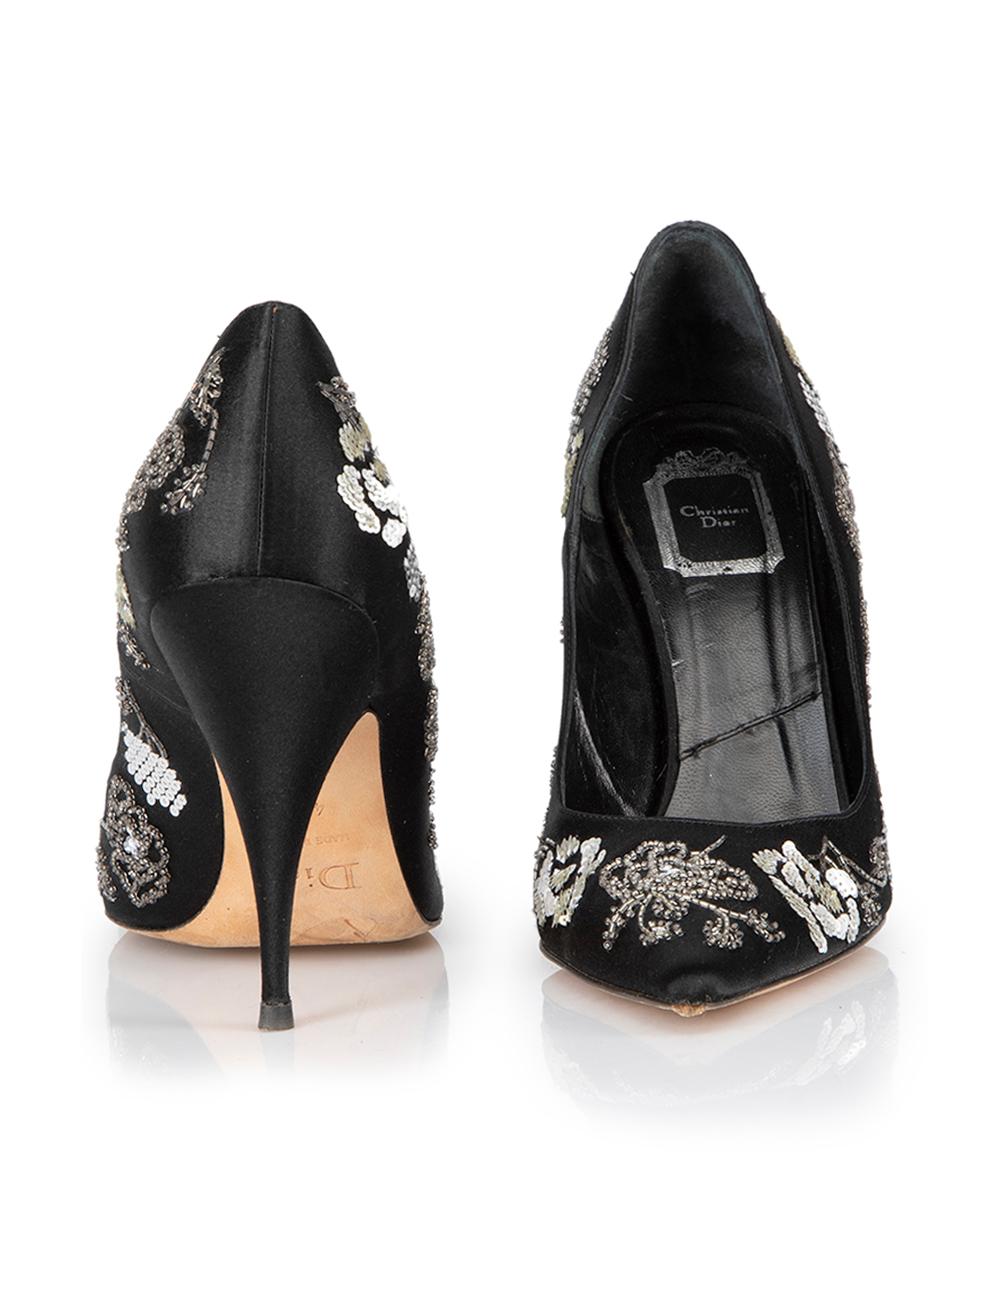 Dior Women's Black Satin Floral Embellished Pumps In Good Condition In London, GB